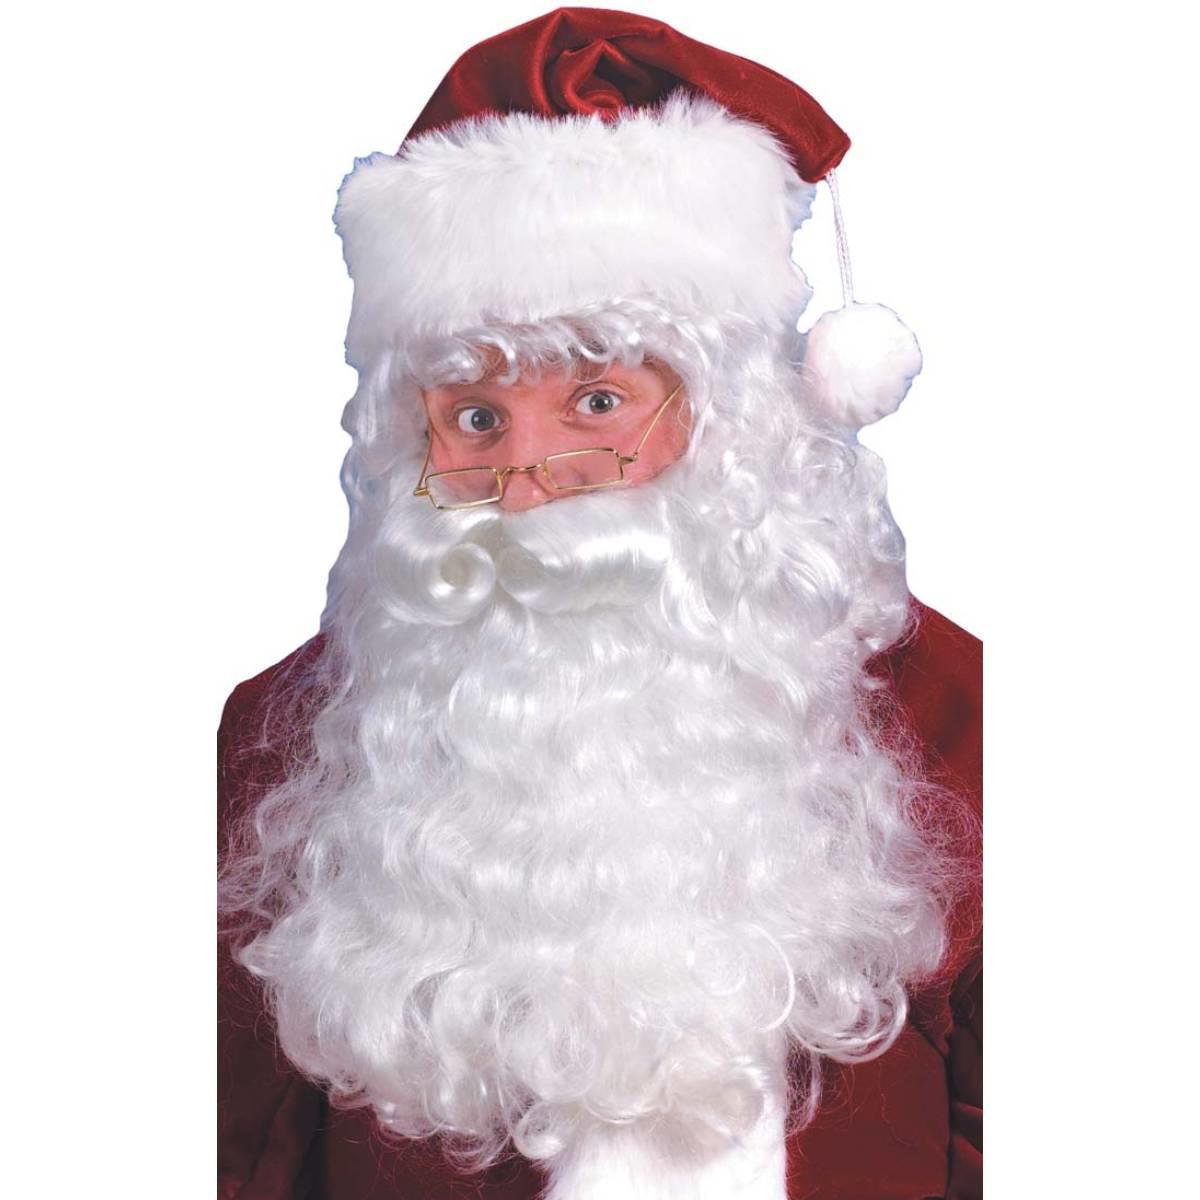 Santa Claus Deluxe Wig with Curly Beard & Moustache by Fun World 7555 available in the UK here at Karnival Costumes online Christmas party shop